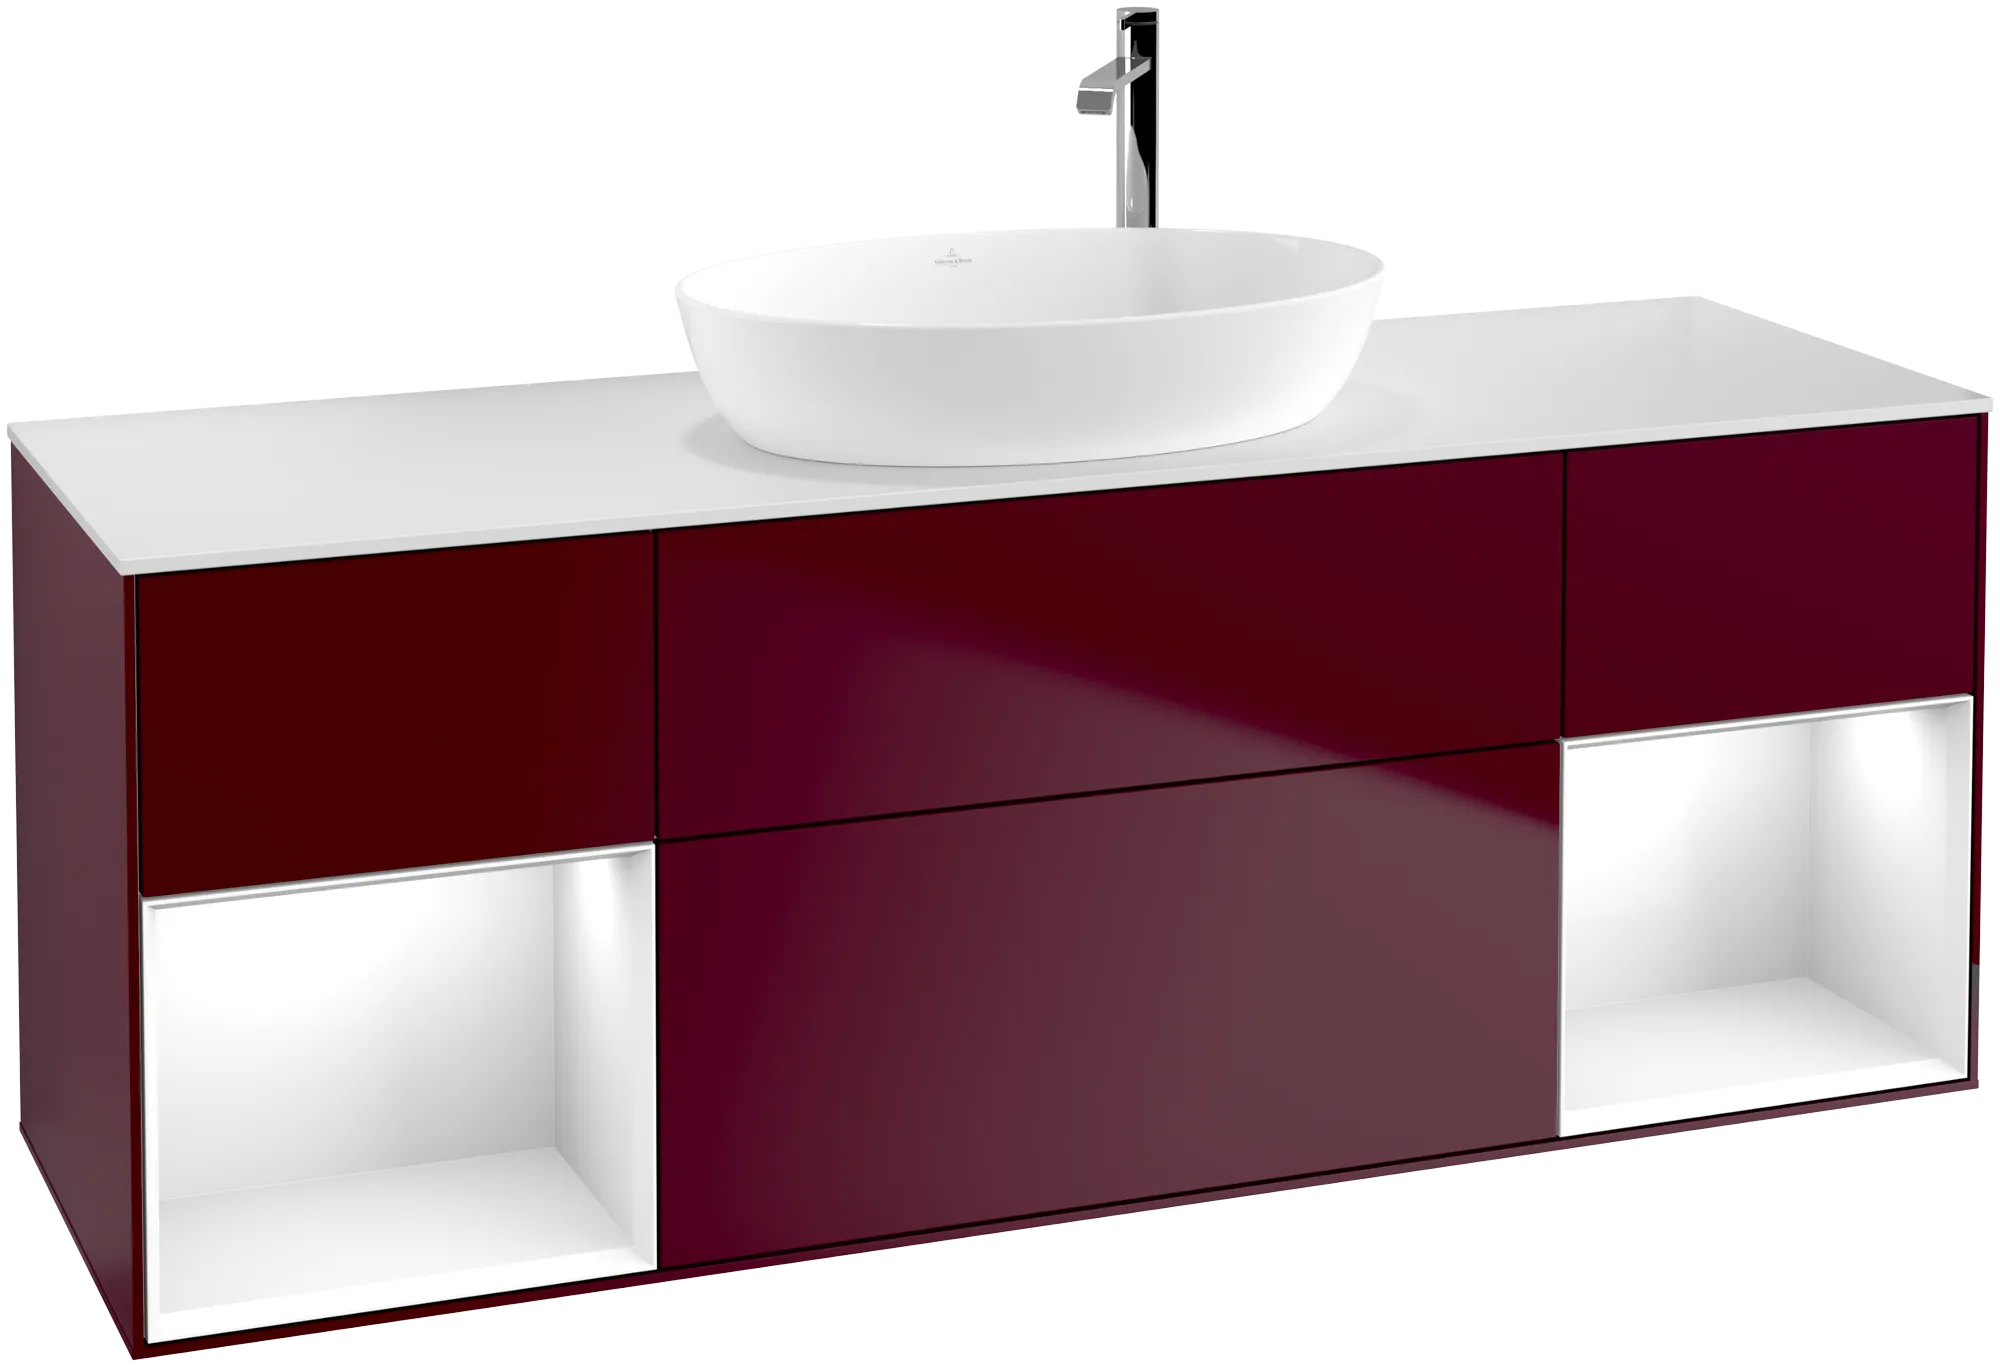 VILLEROY BOCH Finion Vanity unit, with lighting, 4 pull-out compartments, 1600 x 603 x 501 mm, Peony Matt Lacquer / Glossy White Lacquer / Glass White Matt #G981GFHB resmi